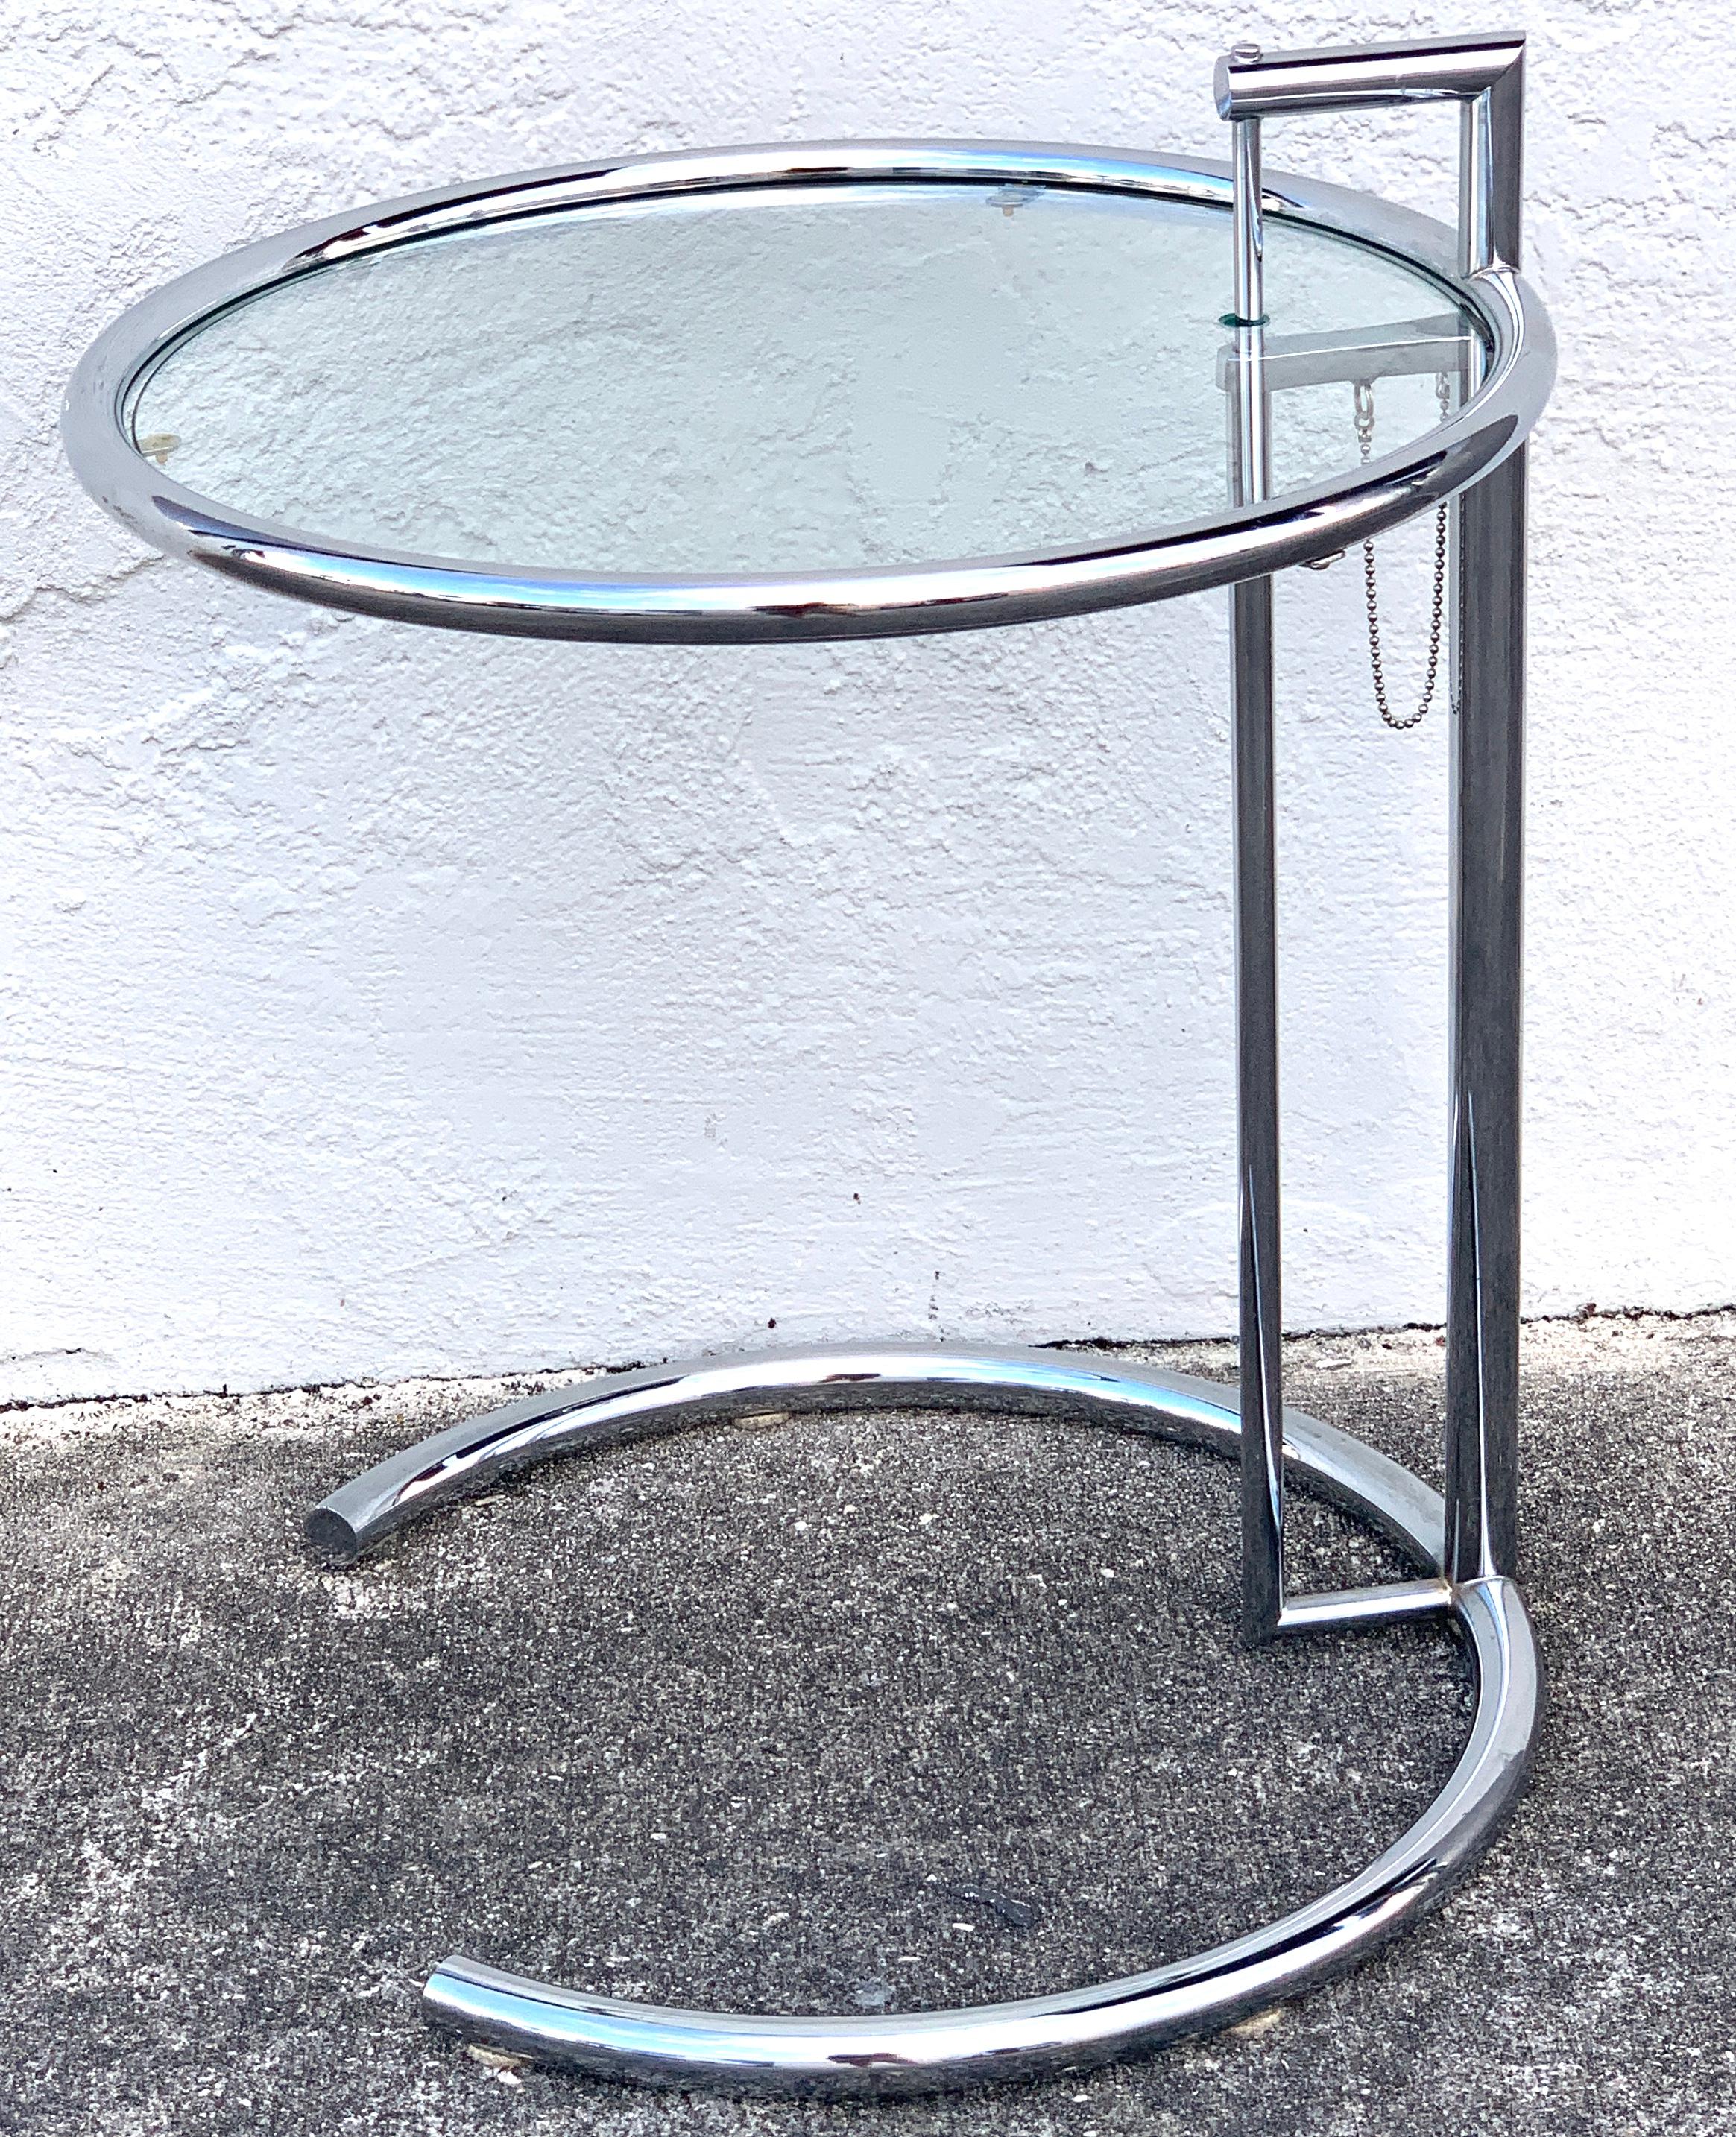 Polished Pair of Chrome and Glass E-1027 Side Tables, In the Style of Eileen Gray